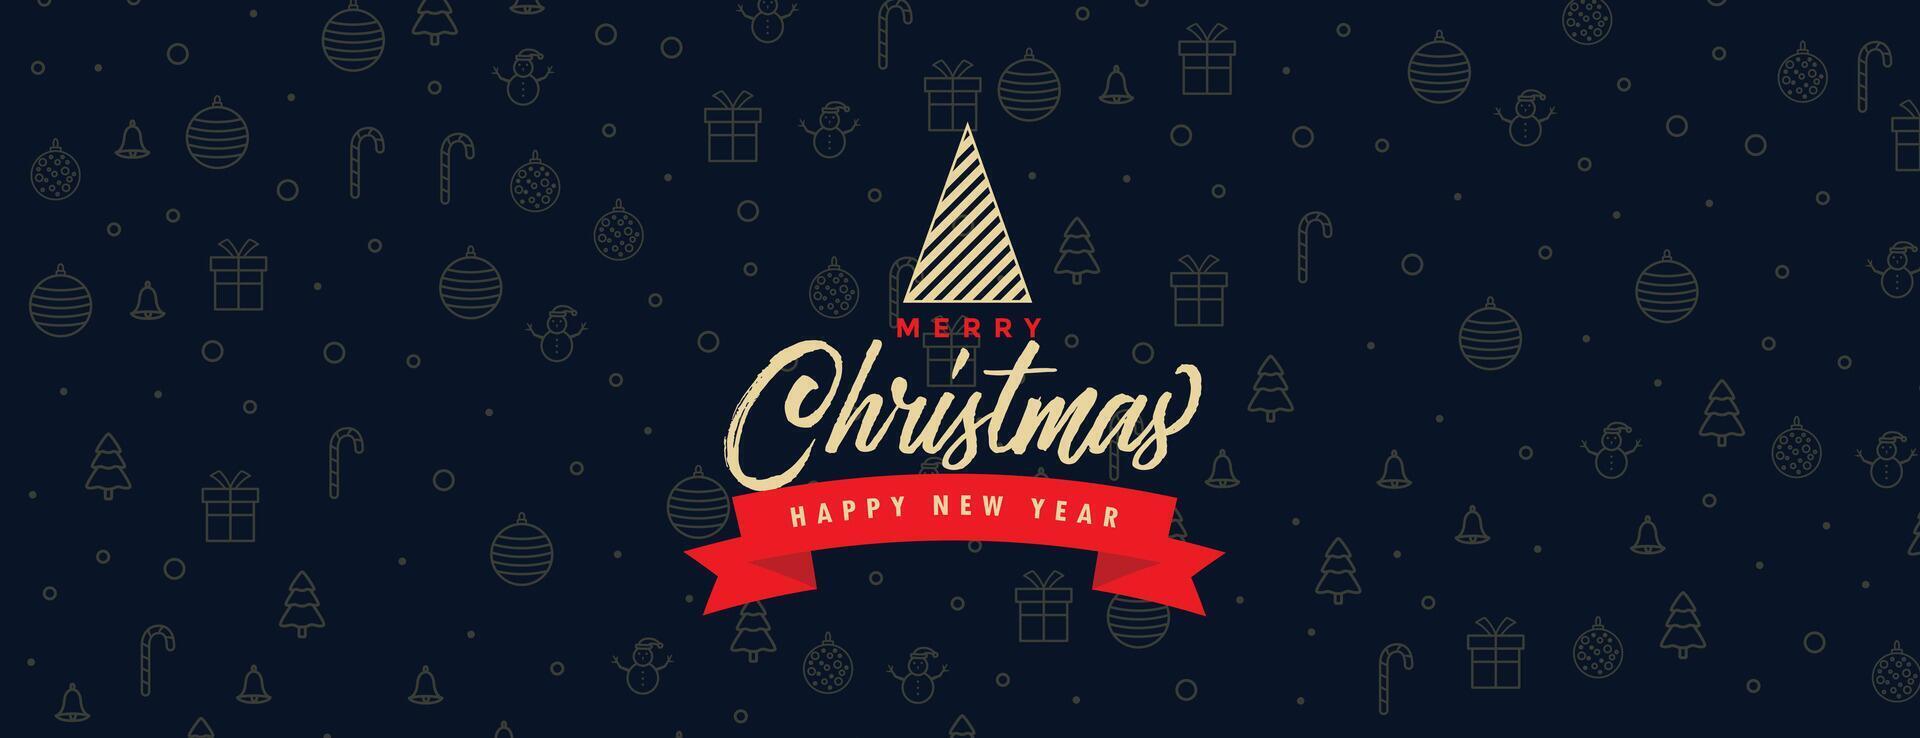 merry christmas festival banner with xmas elements pattern vector